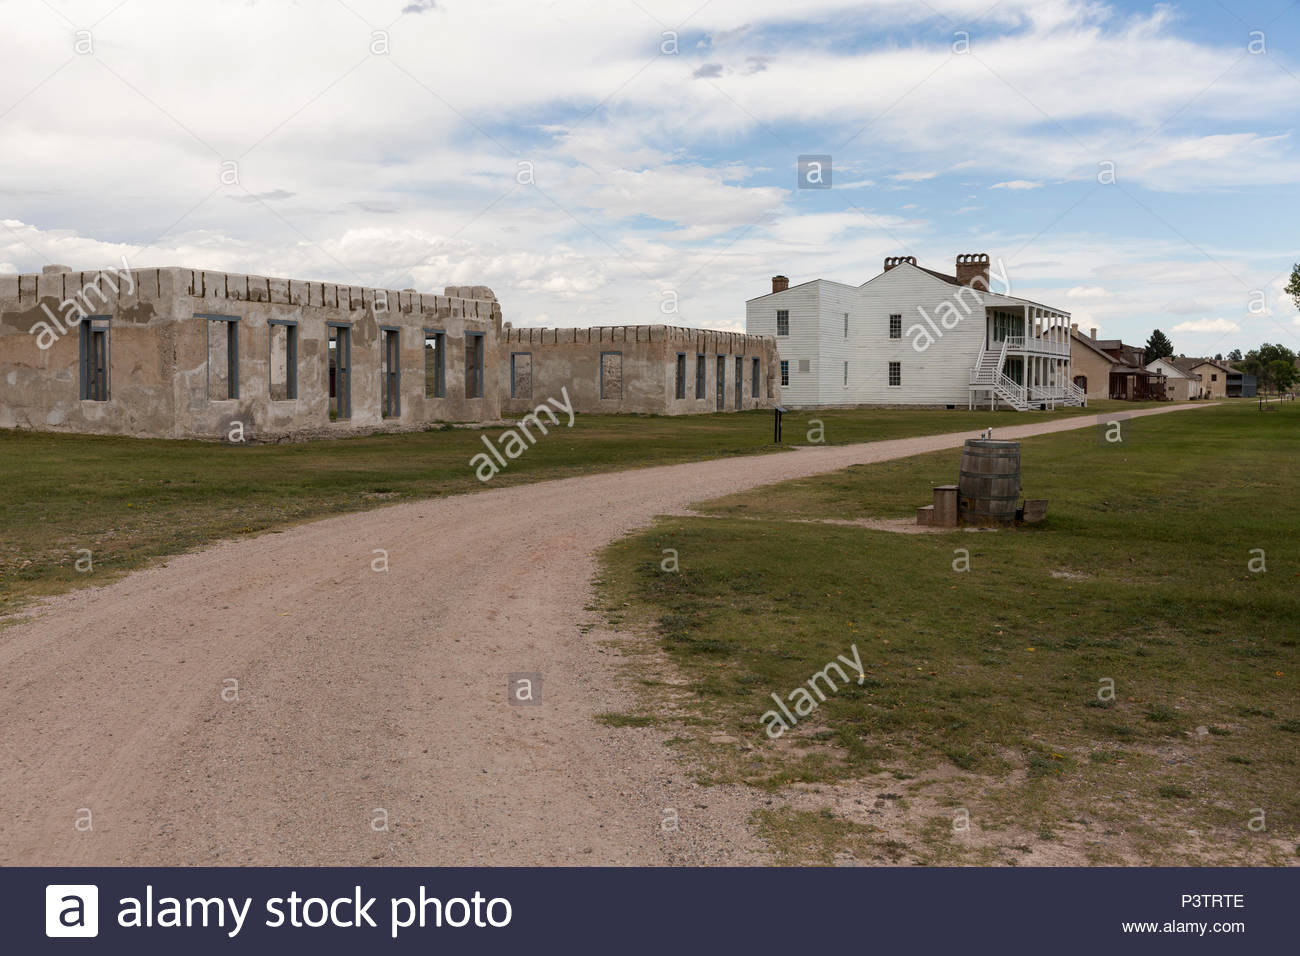 Officers Quarters Ruins And In The Background Old Bedlam